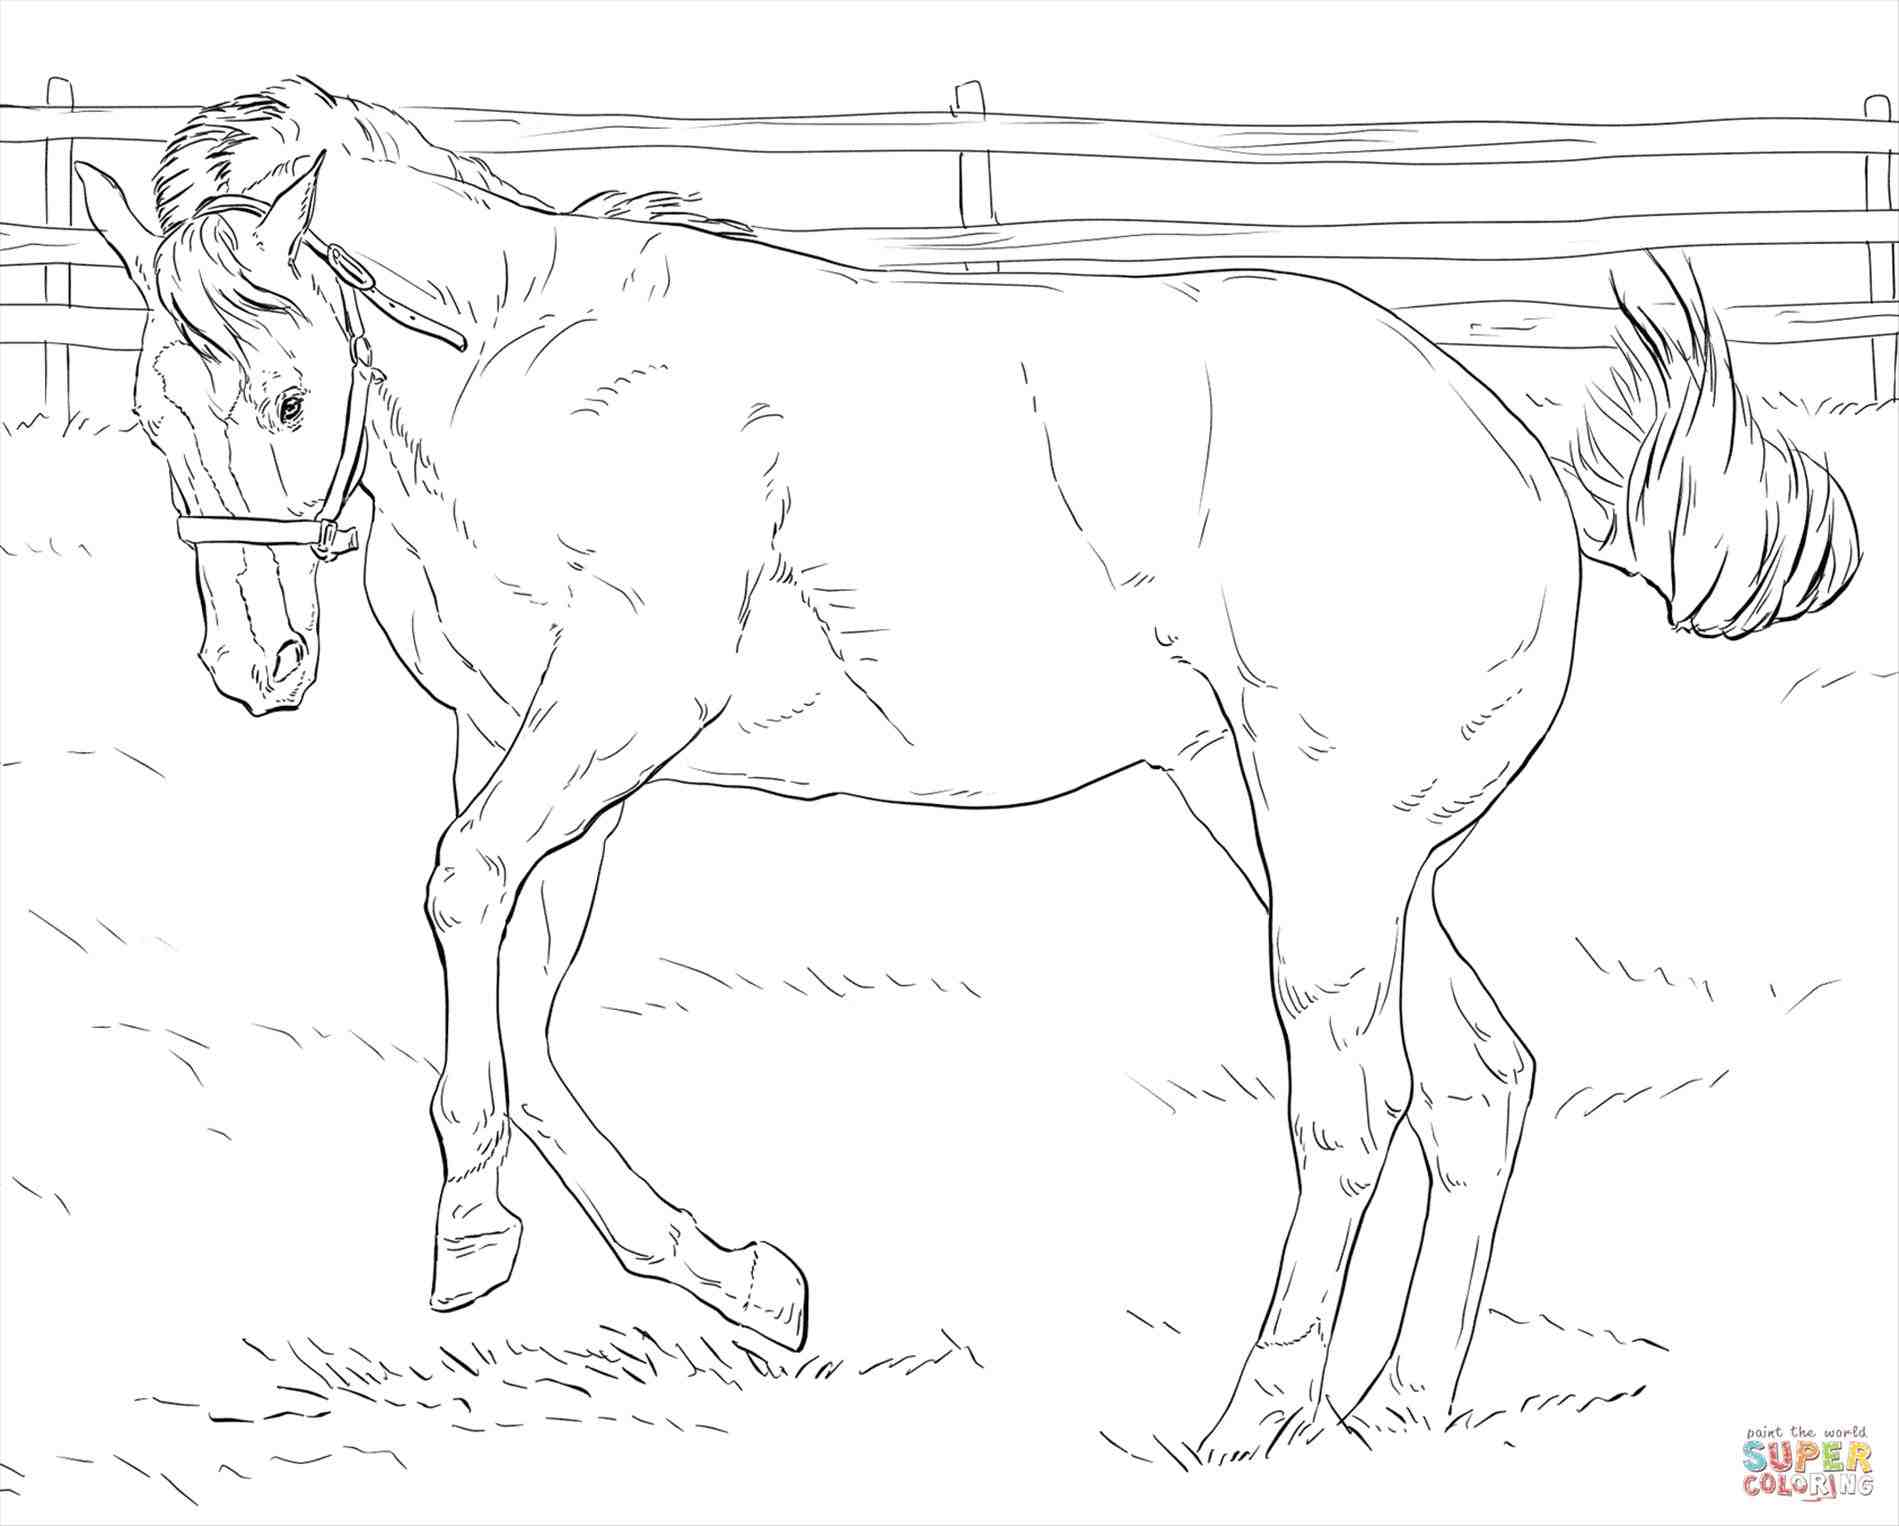 How To Draw A Mustang Horse : Mustang Horse Drawing at GetDrawings